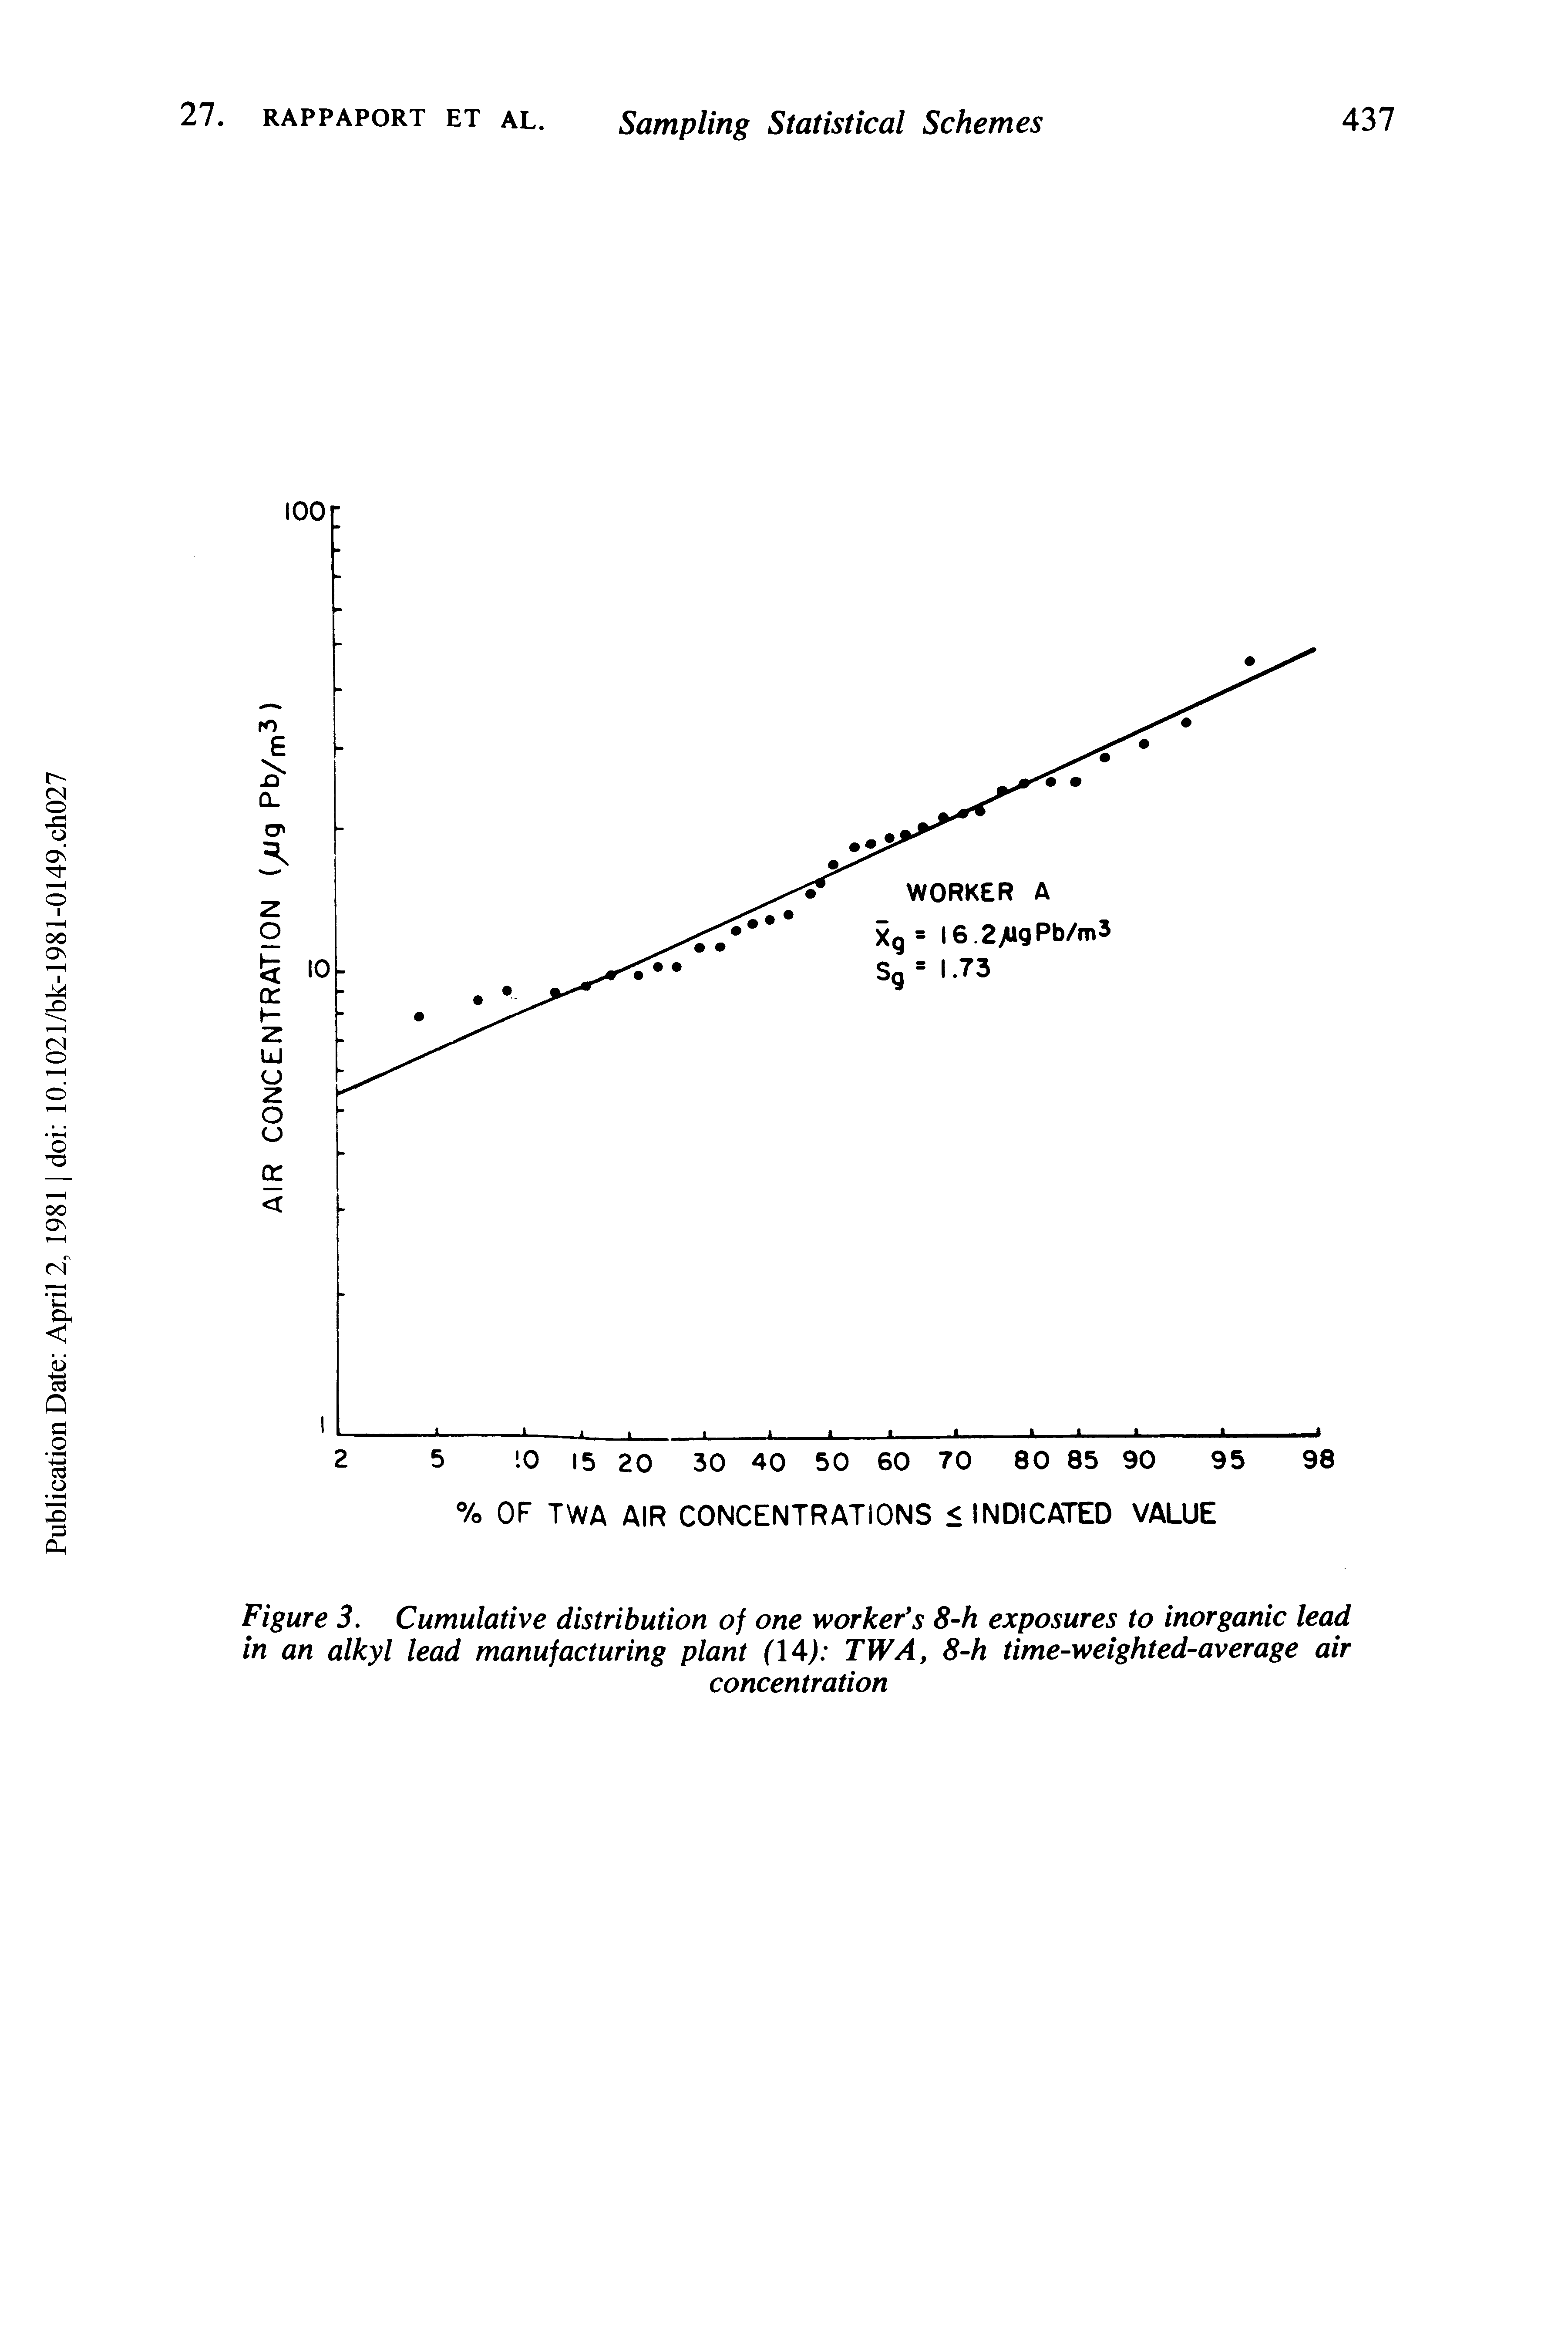 Figure 3. Cumulative distribution of one worker s 8-h exposures to inorganic lead in an alkyl lead manufacturing plant (14) TWA, 8-h time-weighted-average air...